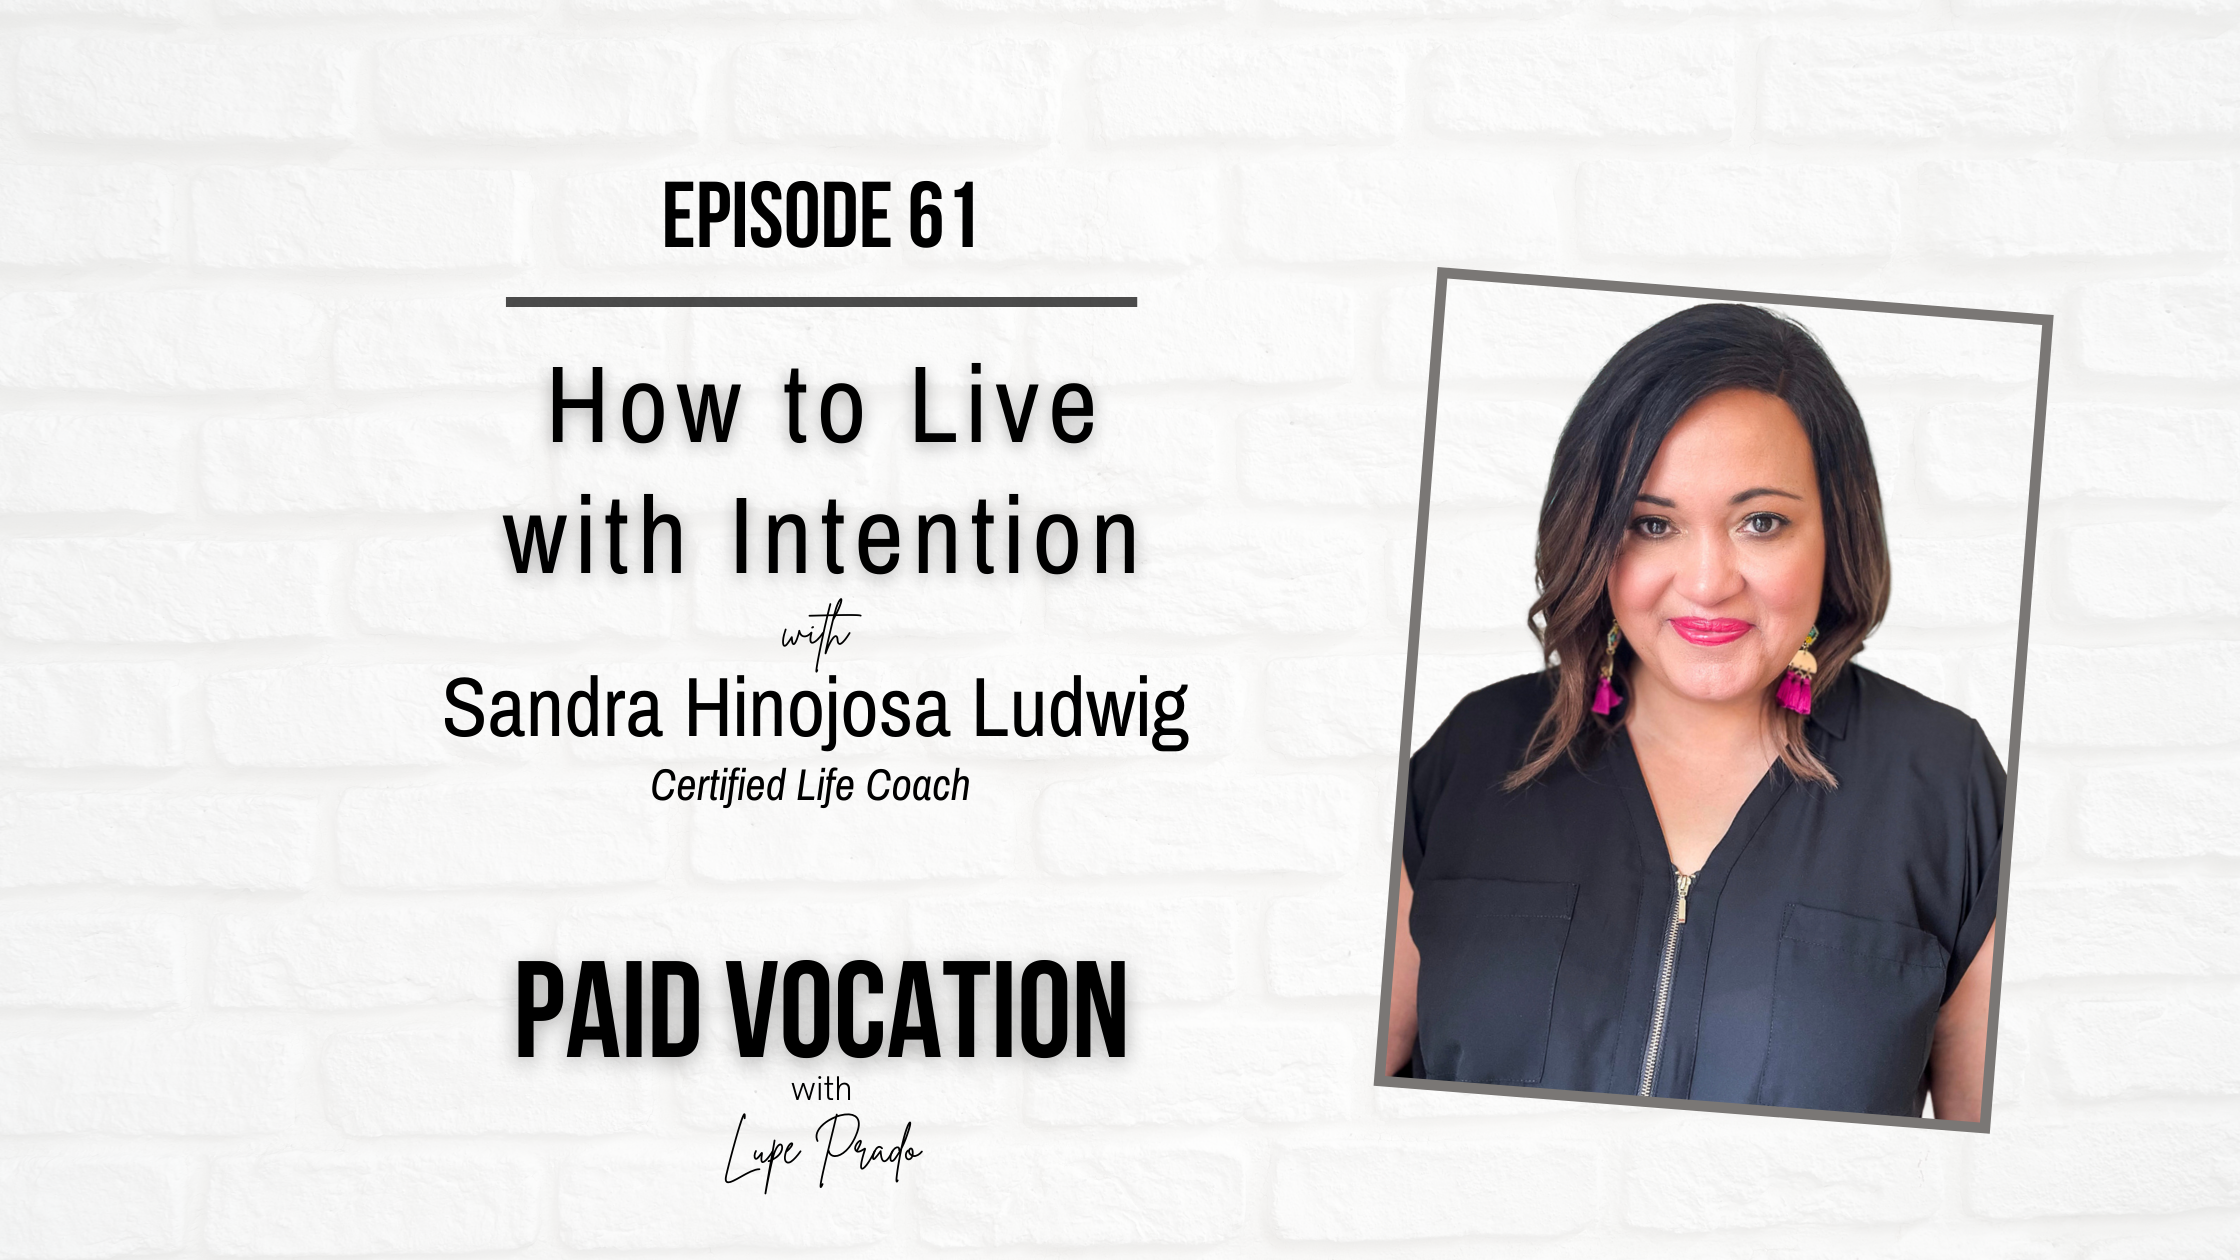 How to Live with Intention with Sandra Hinojosa Ludwig- Paid Vocation